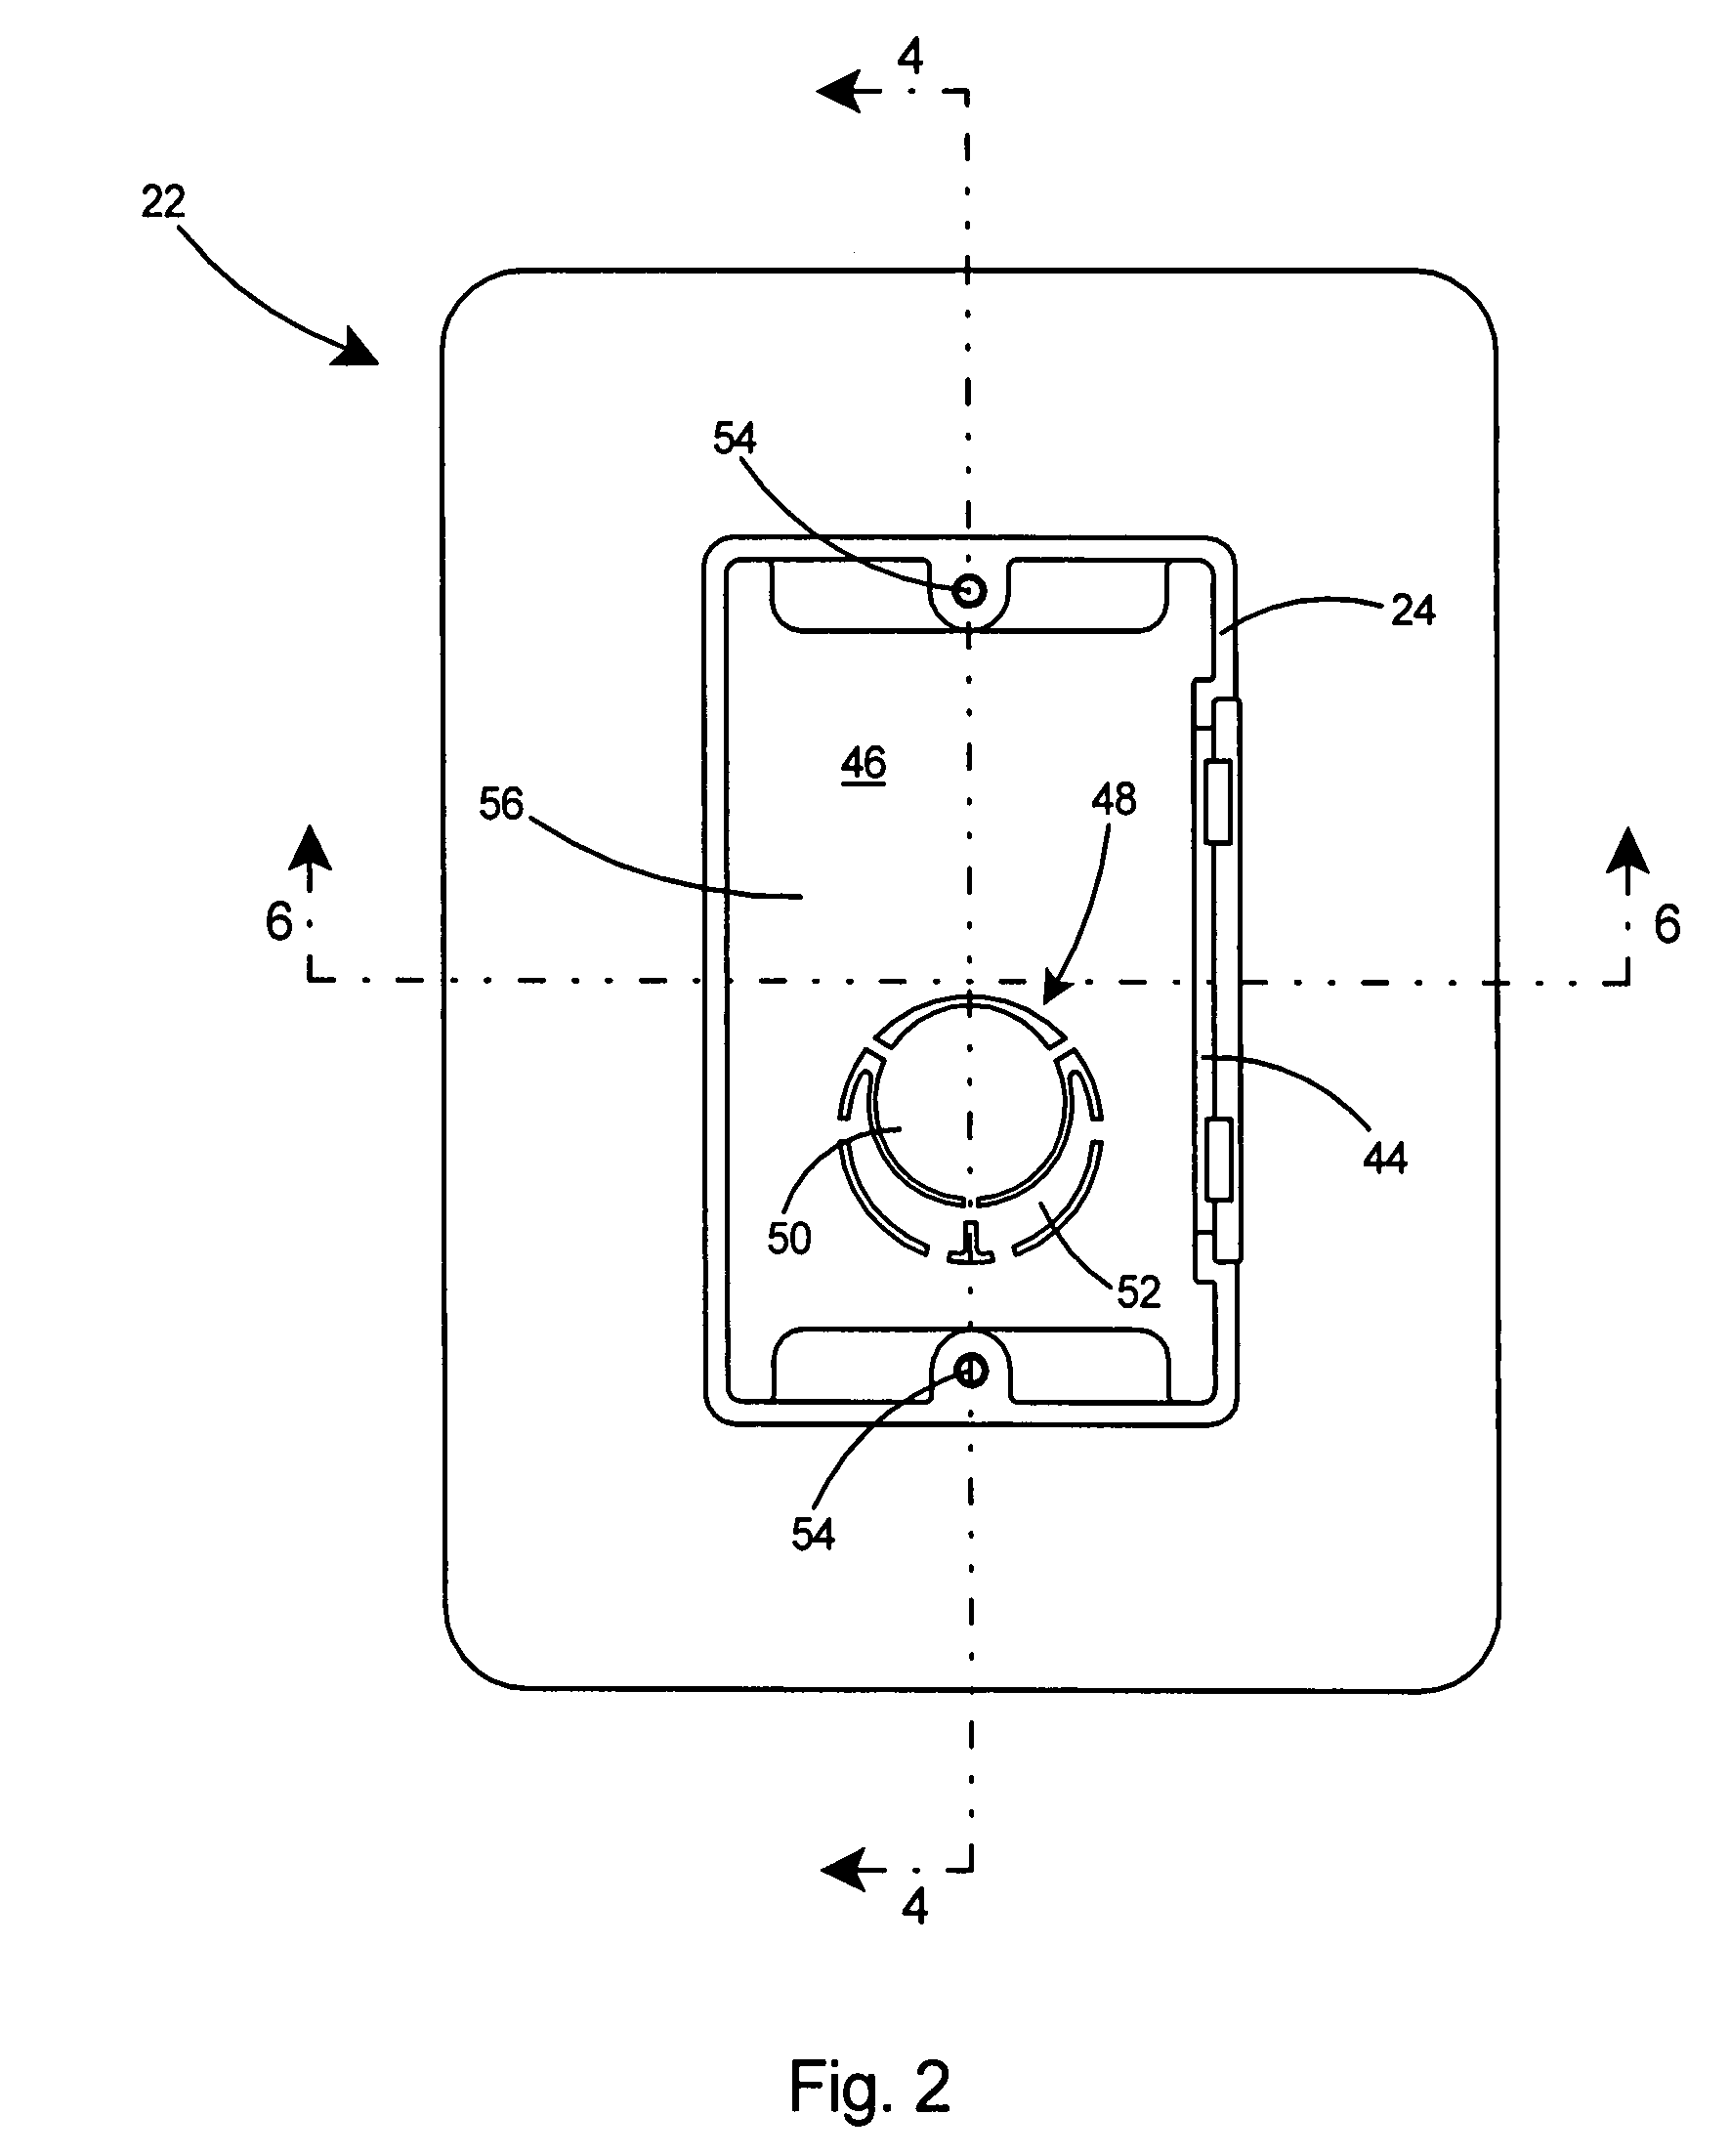 Electrical box assembly with internal mounting arrangement and flange to seal against air infiltration